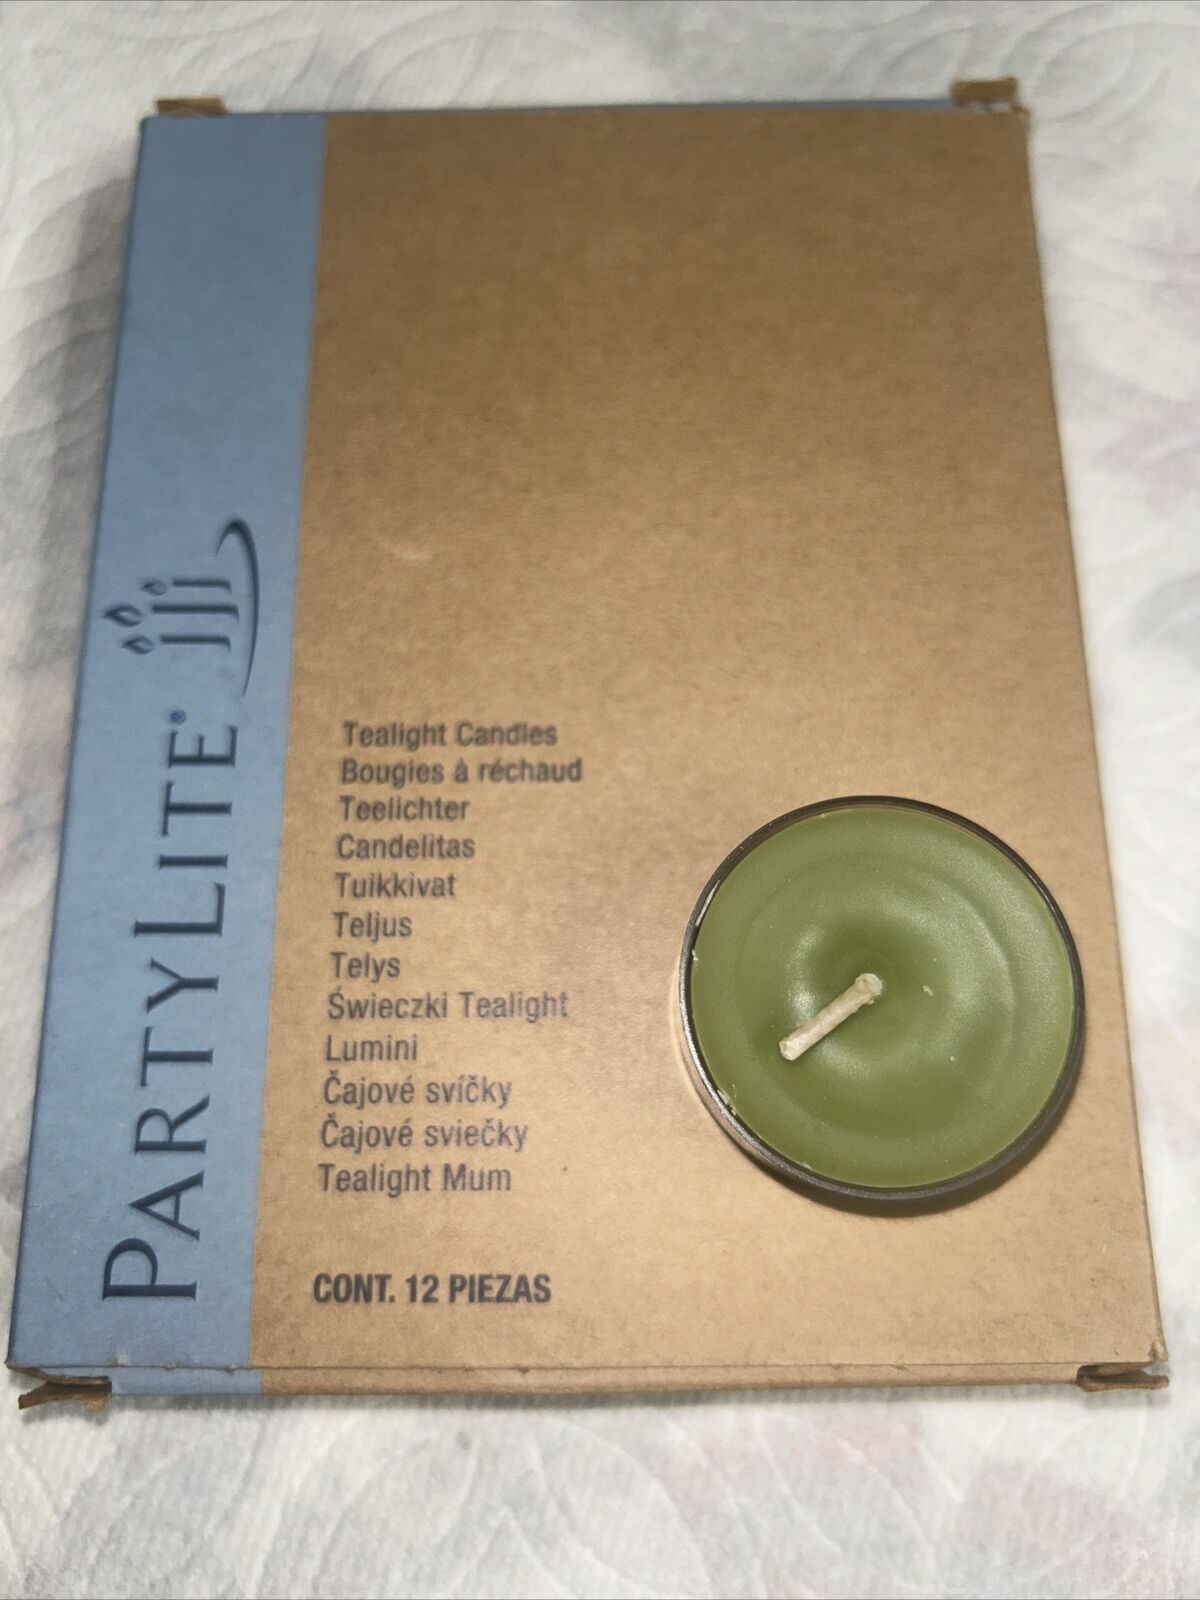 PartyLite Bamboo Mist Tealights 12 in box V04550